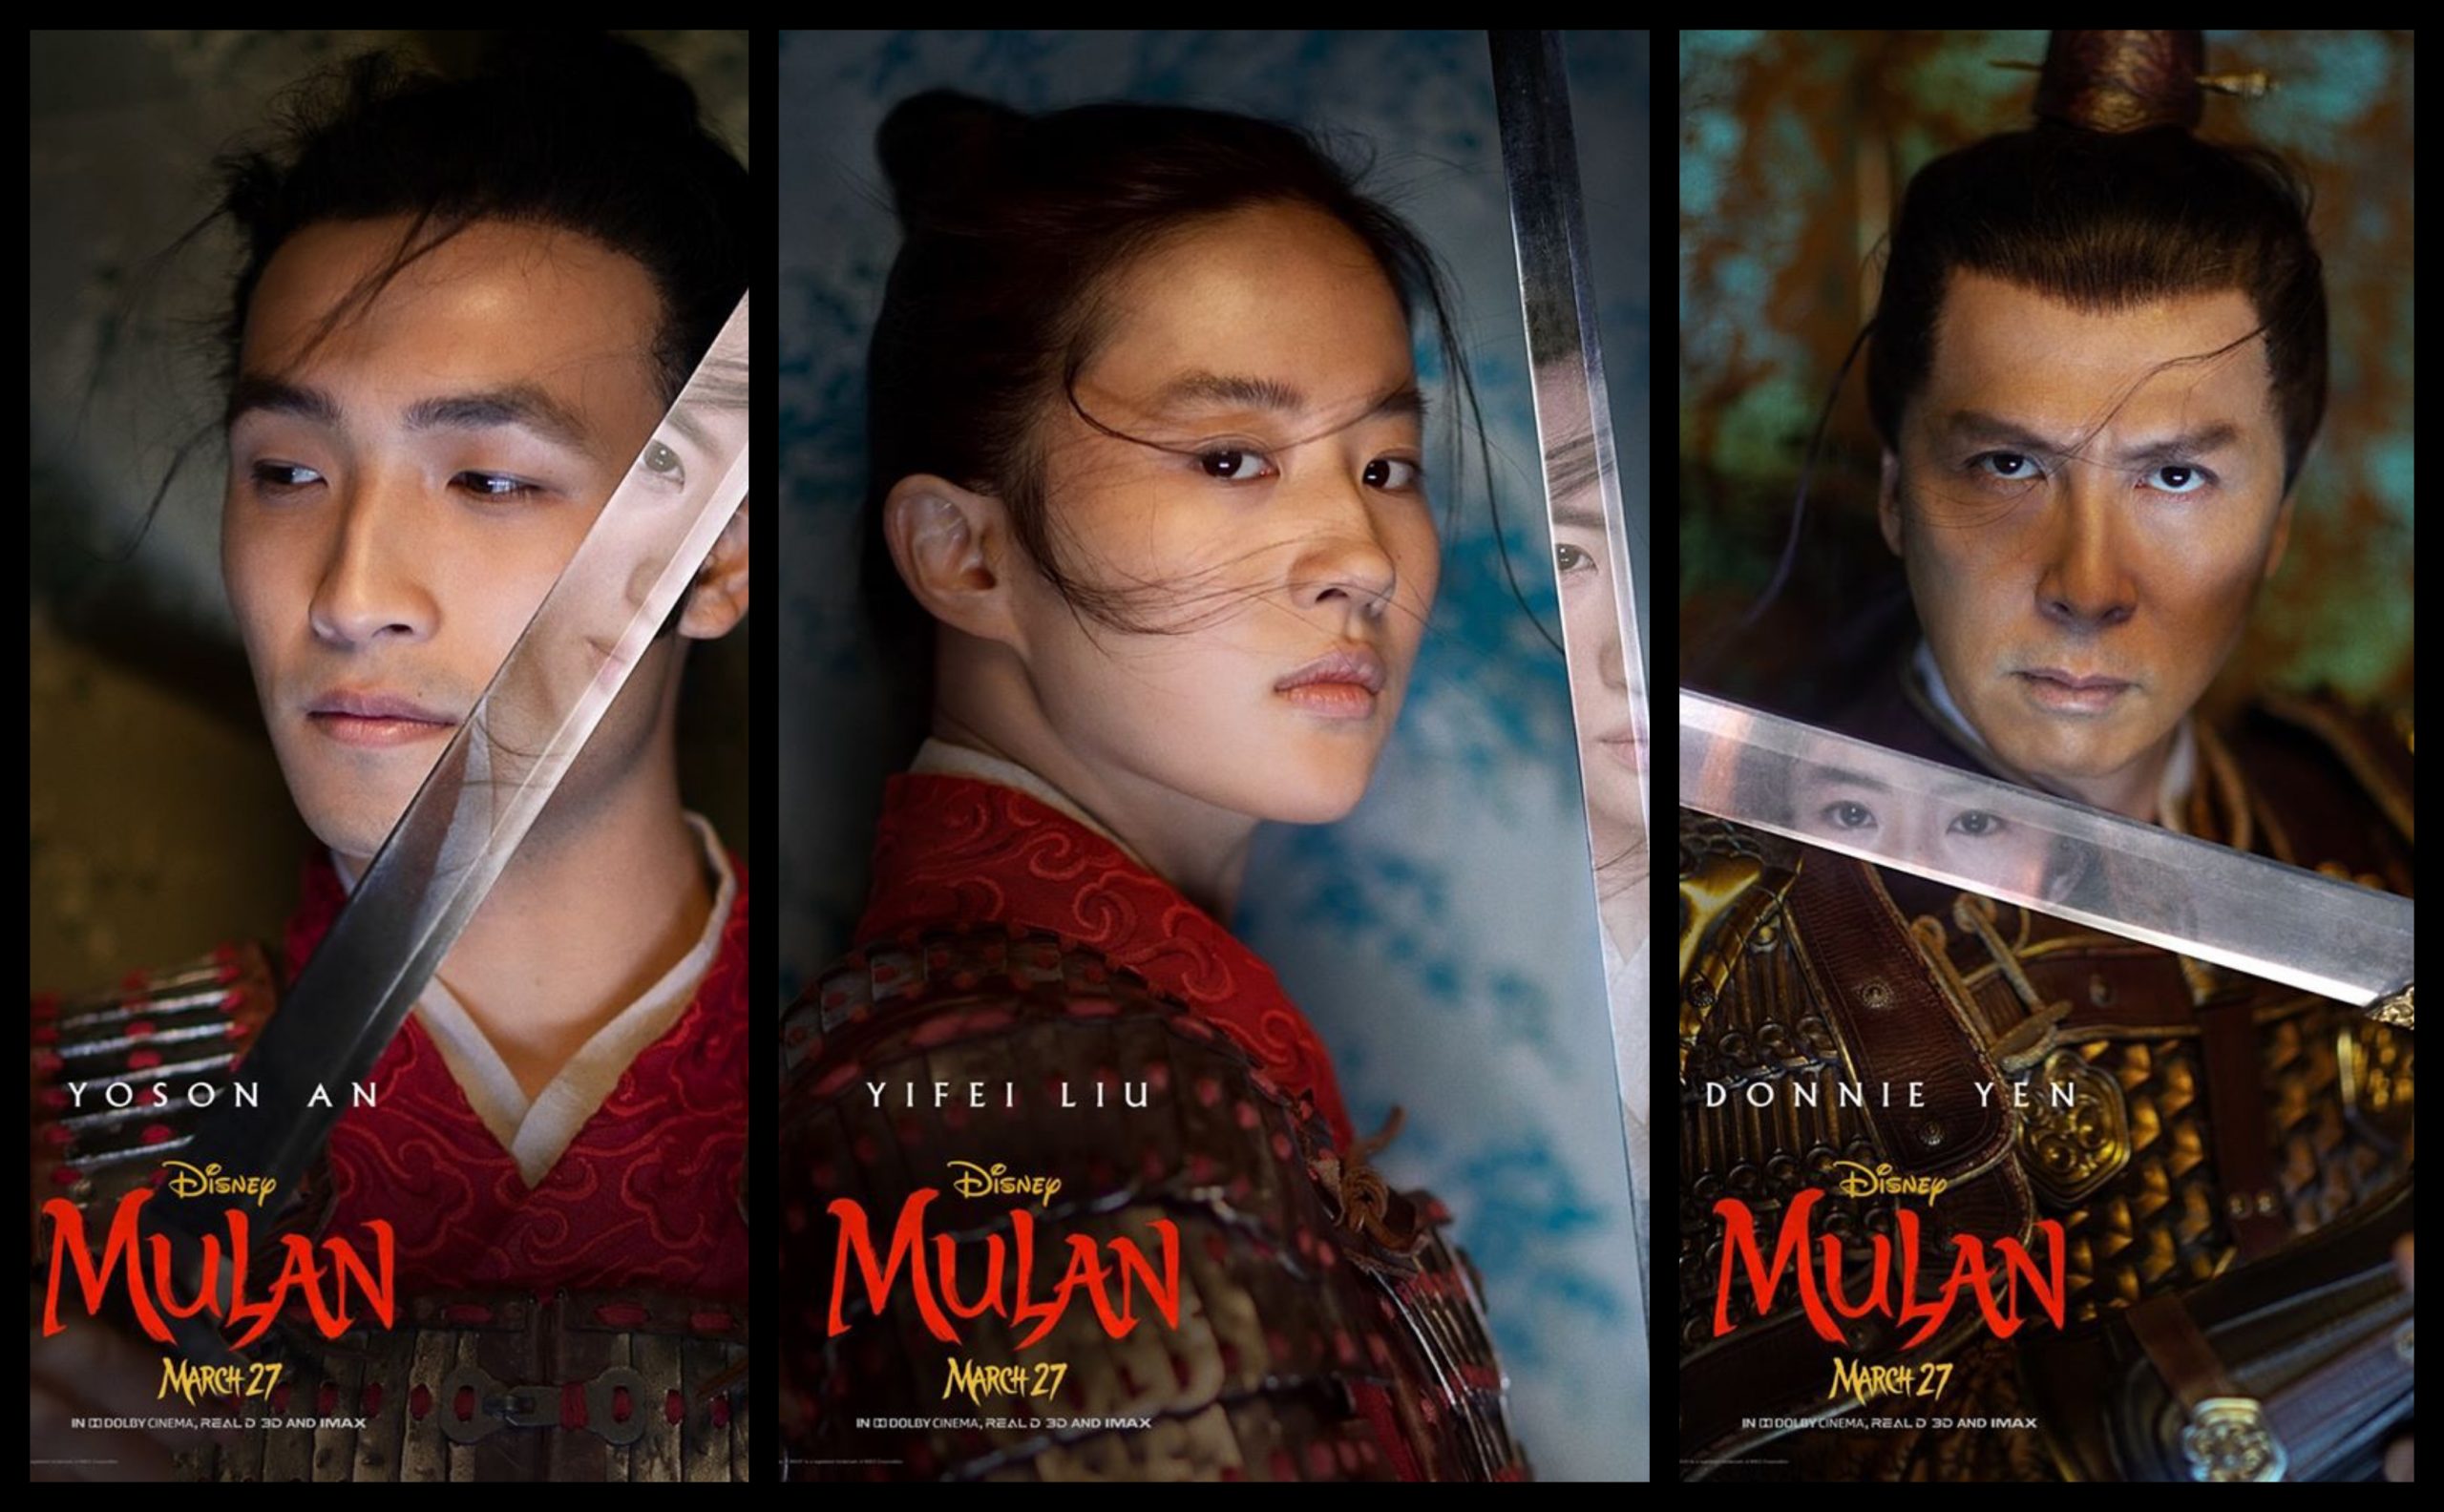 Check Out the New Character Posters for Disney’s Live-Action ‘Mulan’